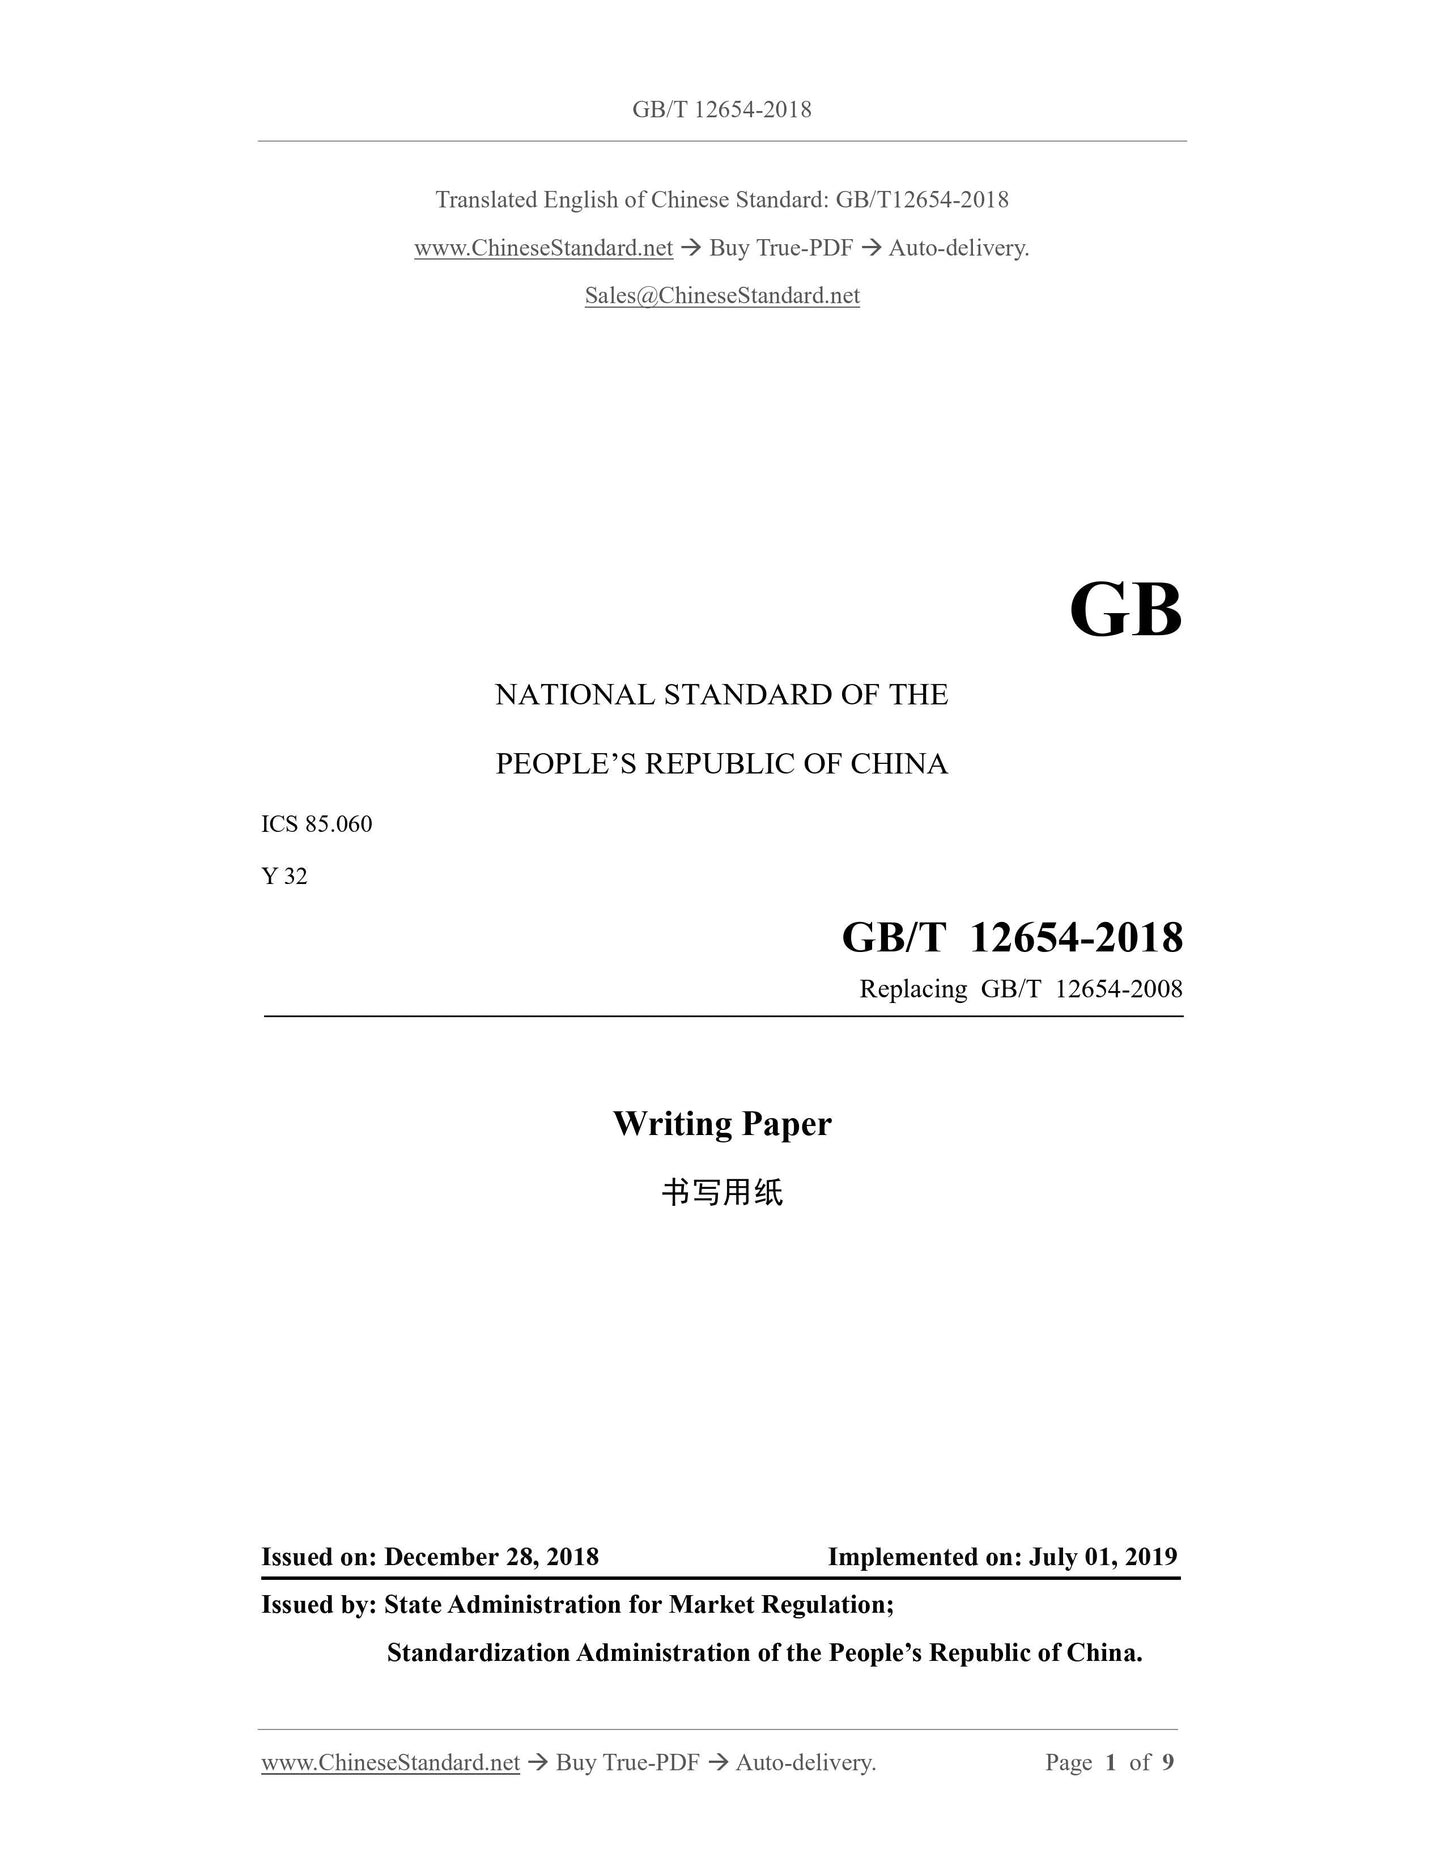 GB/T 12654-2018 Page 1